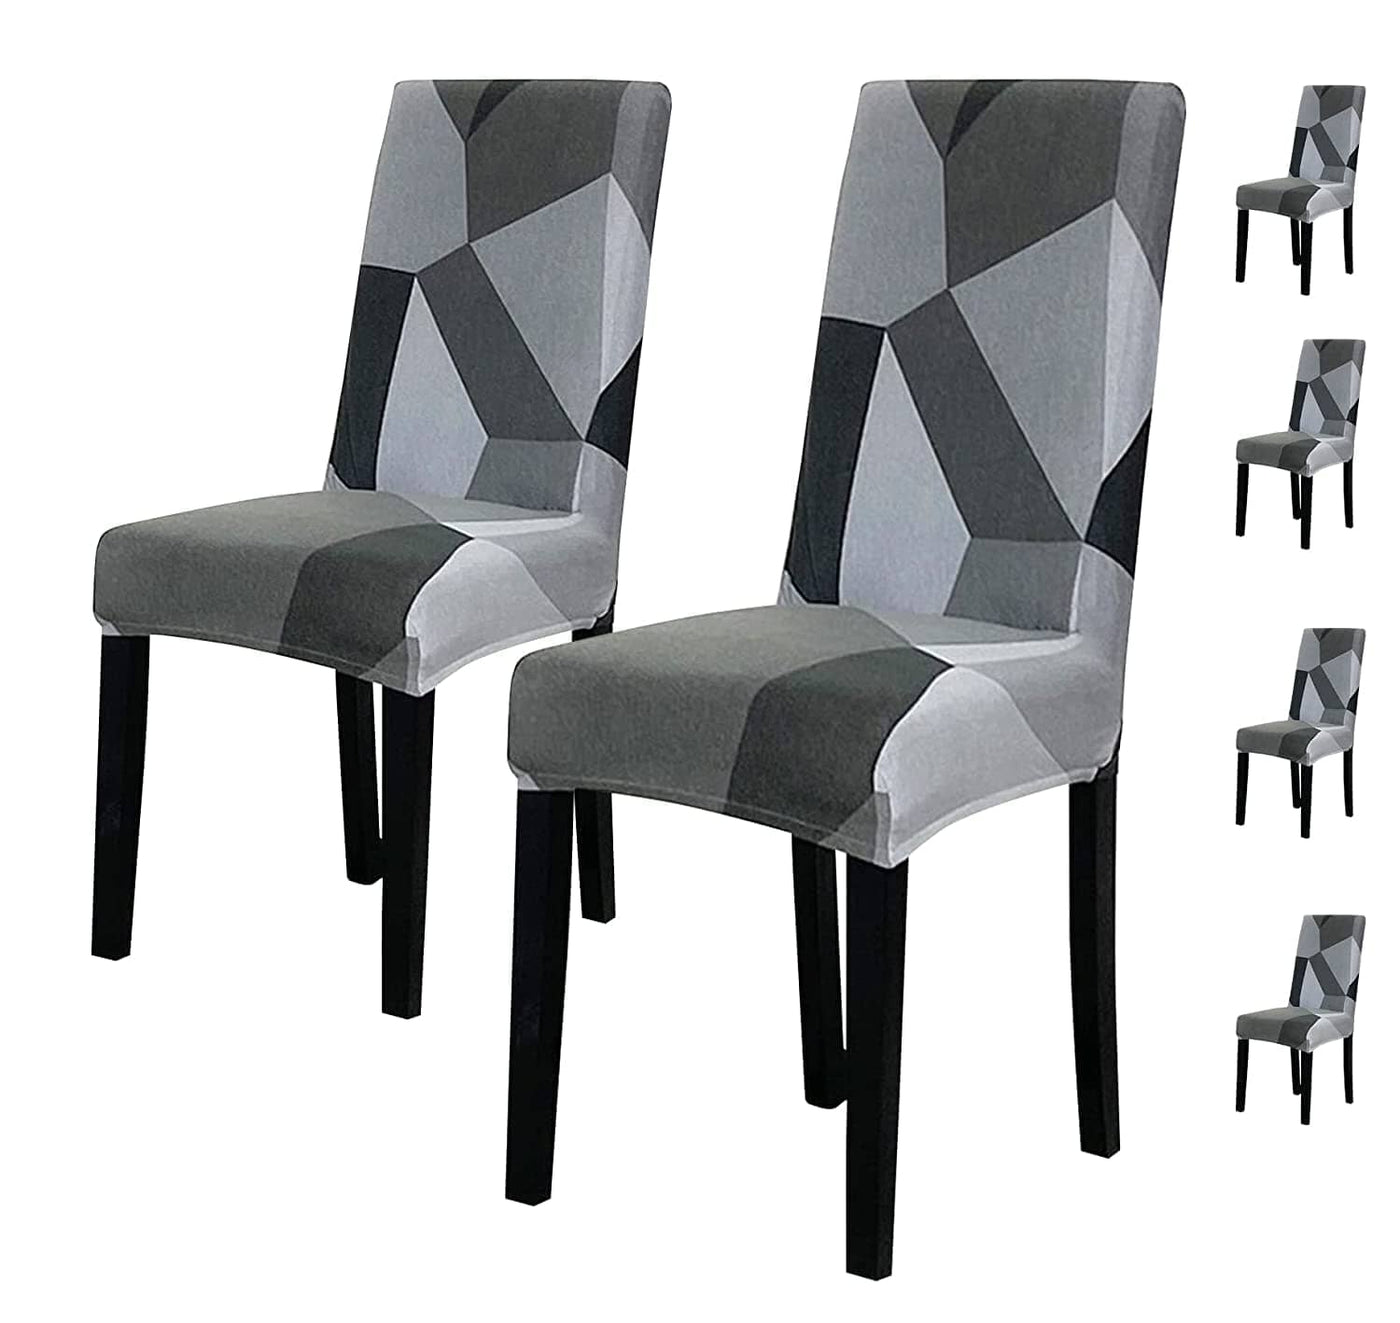 Dark Grey Prism Premium Chair Cover - Stretchable & Elastic Fitted Great Happy IN 2 PCS - ₹799 